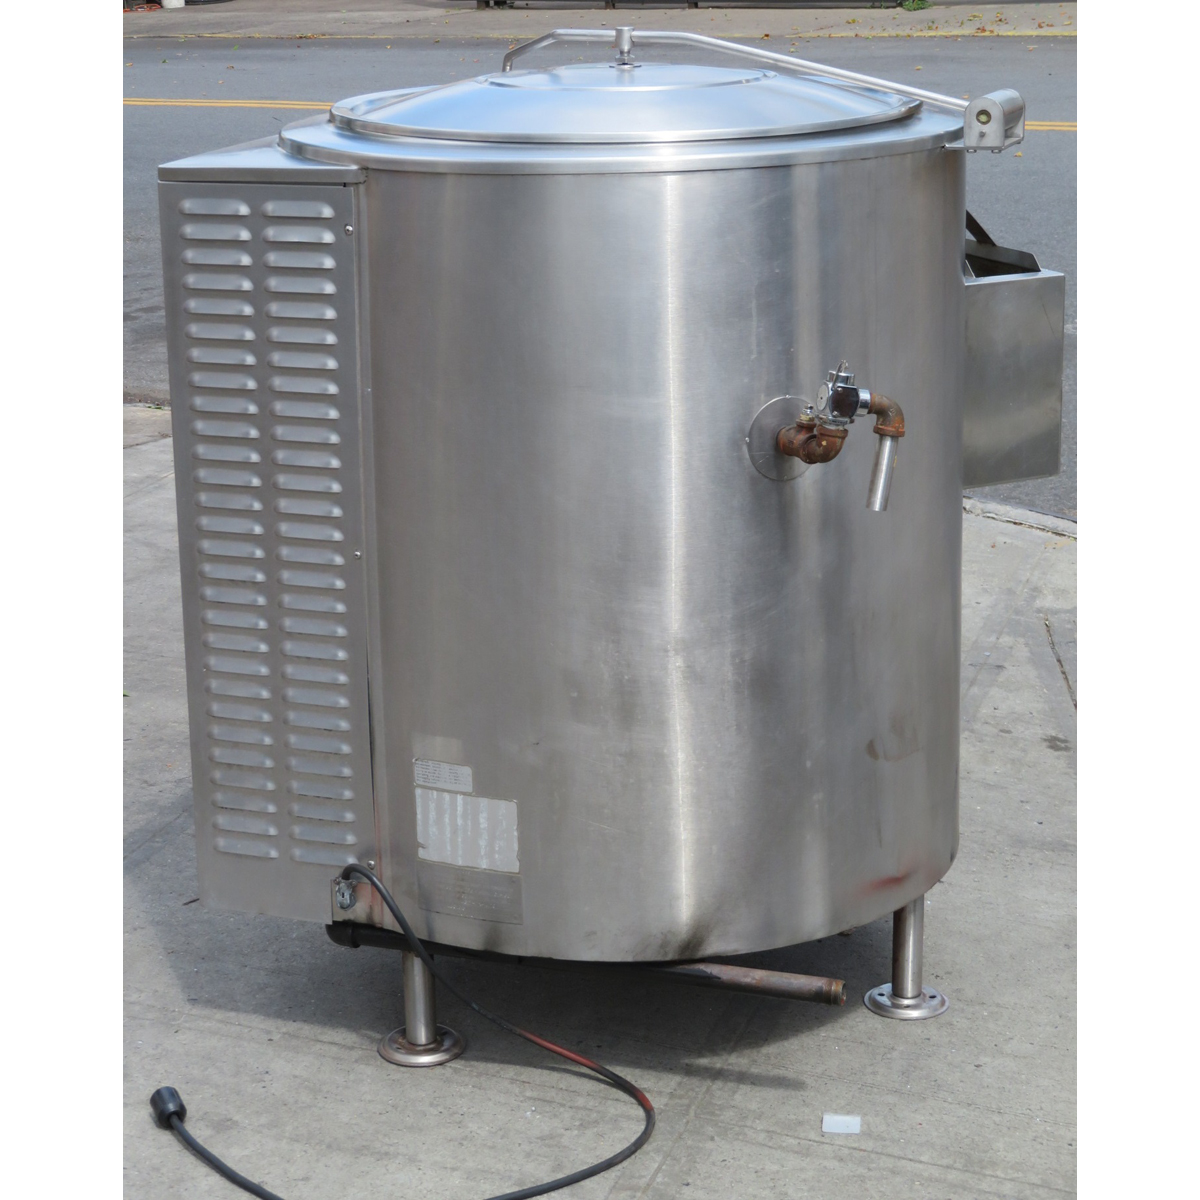 Vulcan VGL60E 60 Gallon Gas Steam Kettle 130,000 BTU, Used Excellent Condition image 2